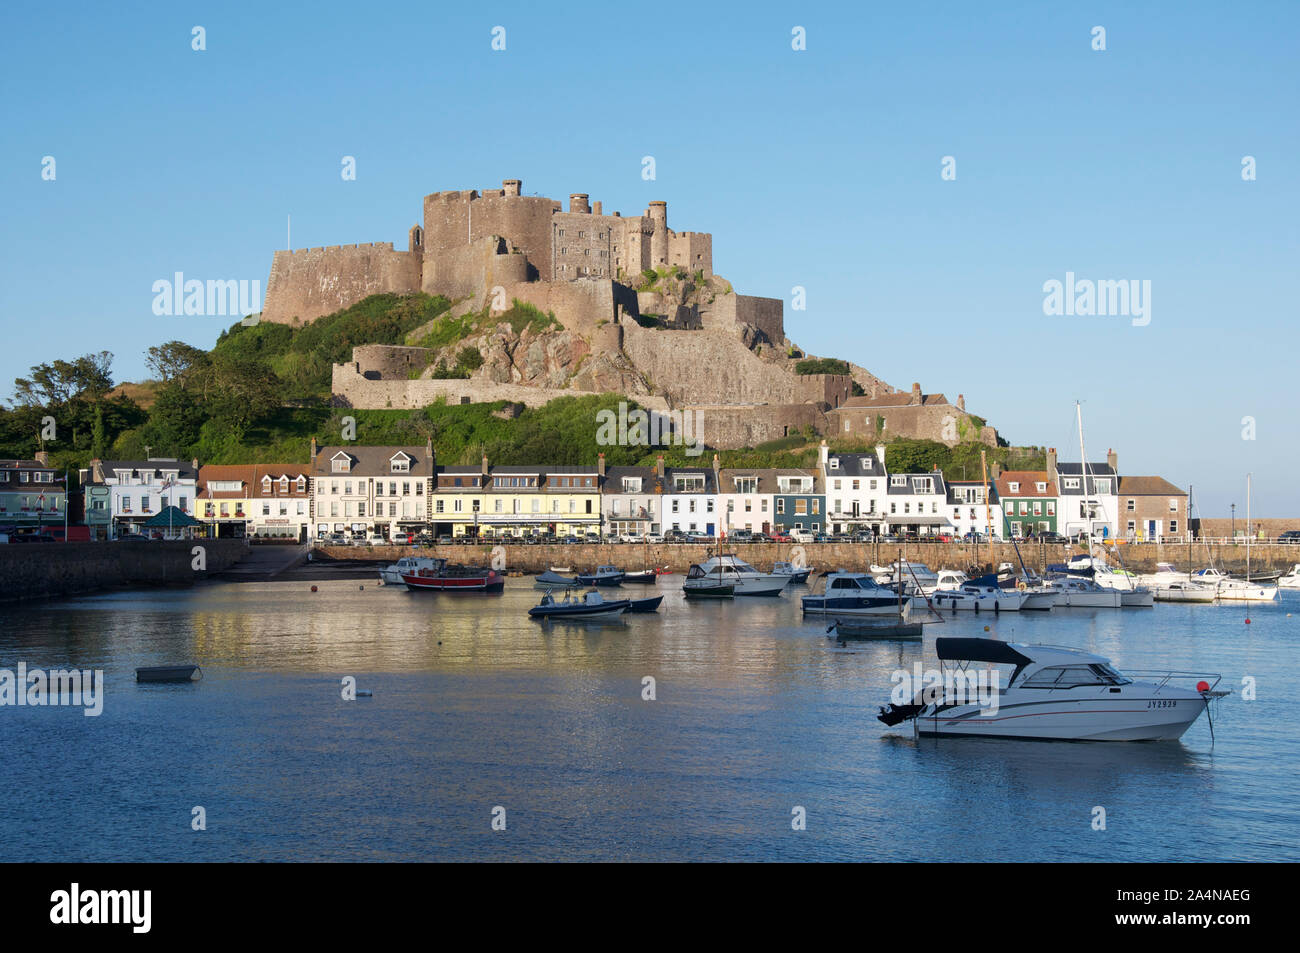 The towering historic medieval stone ramparts of Mont Orgueil Castle loom above the picturesque village and harbour of Gorey. Jersey, Channel Islands. Stock Photo